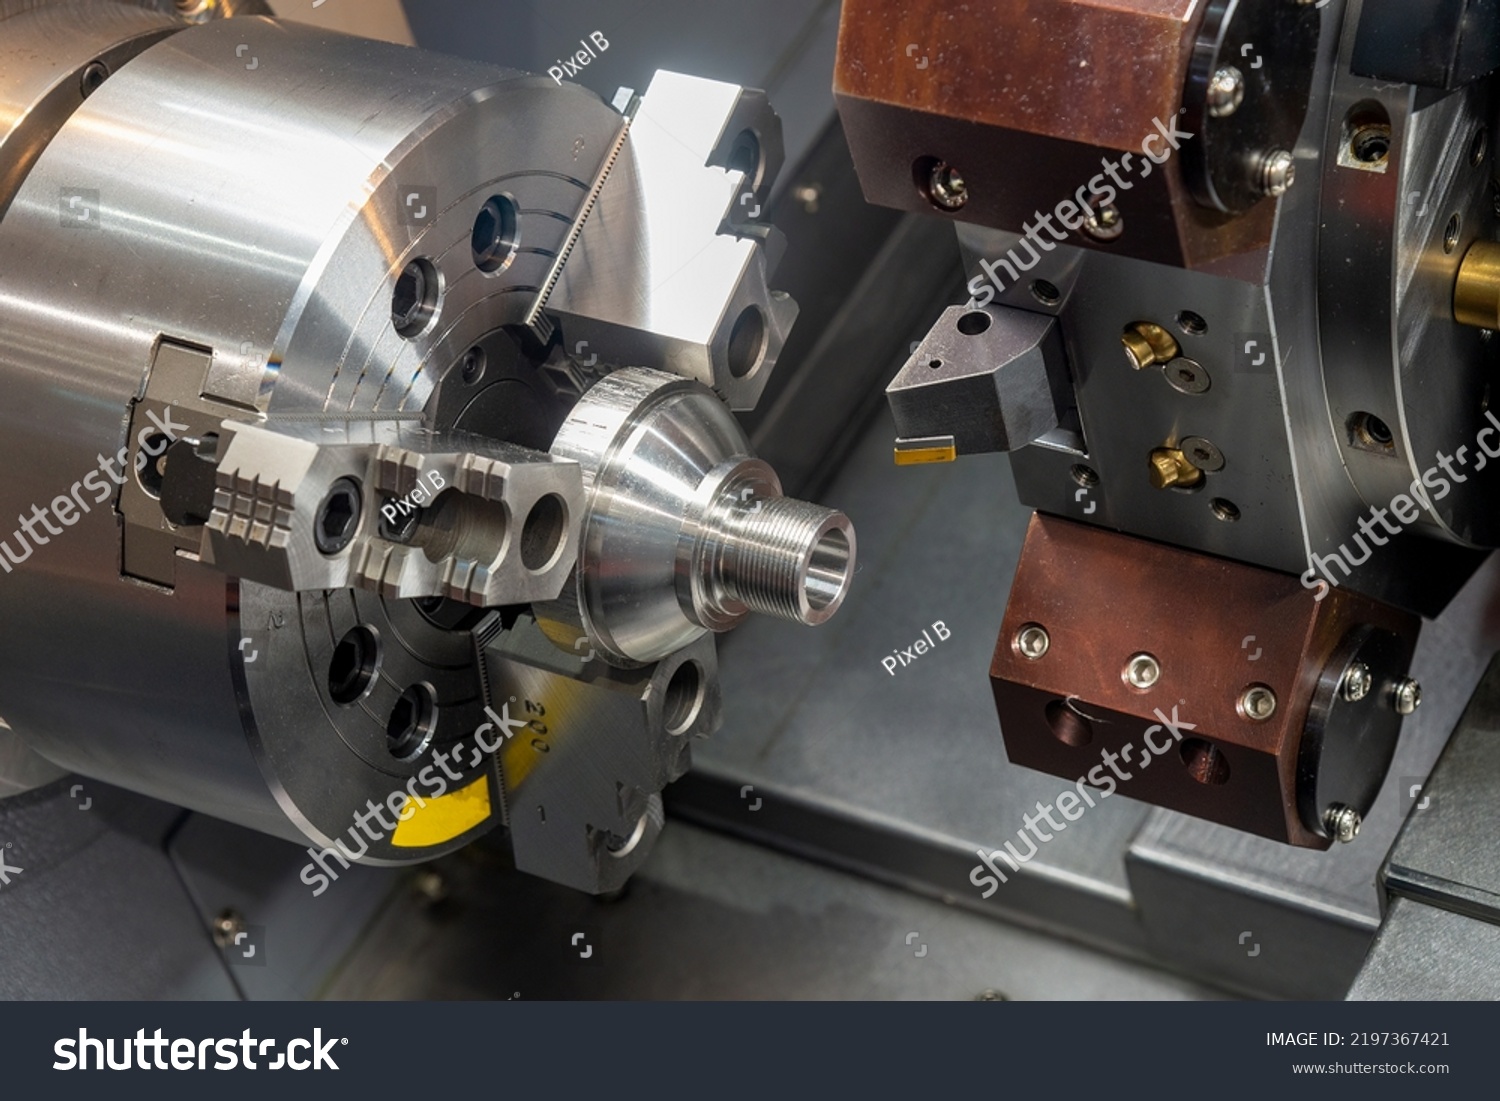 The  CNC lathe machine forming  cutting the metal shaft parts. The hi-technology metal working processing by CNC turning machine . #2197367421